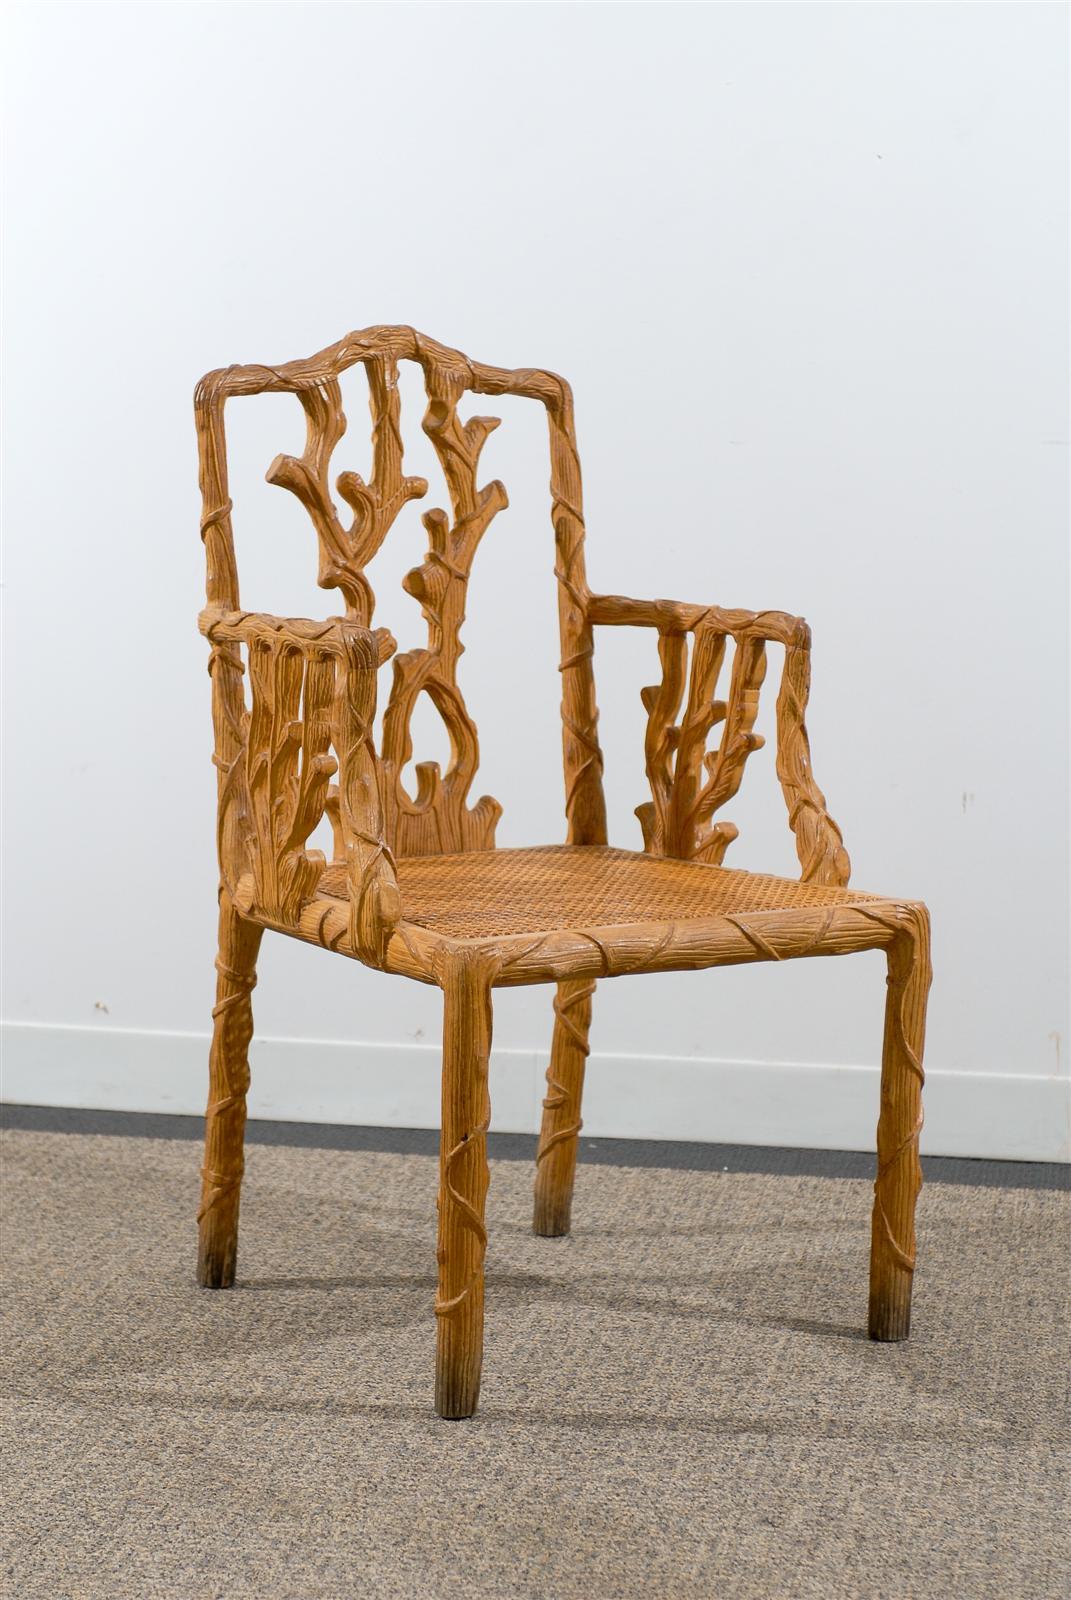 Set of four carved wood twig chairs with caned seats,
circa 1970, origin Spain.